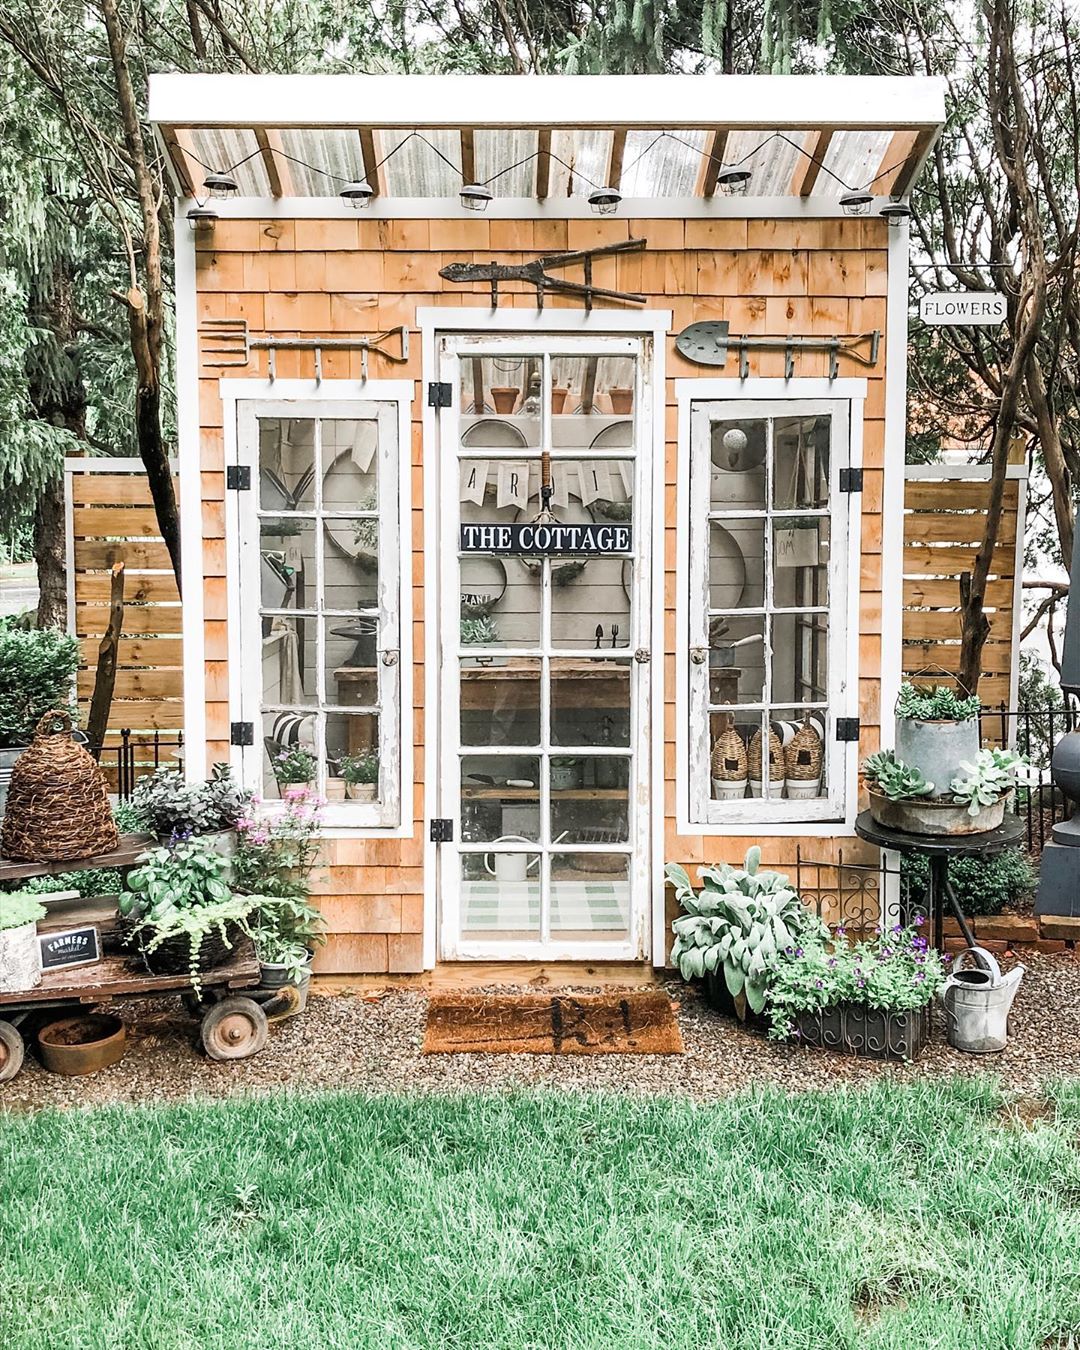 Small Wooden Shingle Sided Garden She Shed. Photo by Instagram user @cottageandbloom